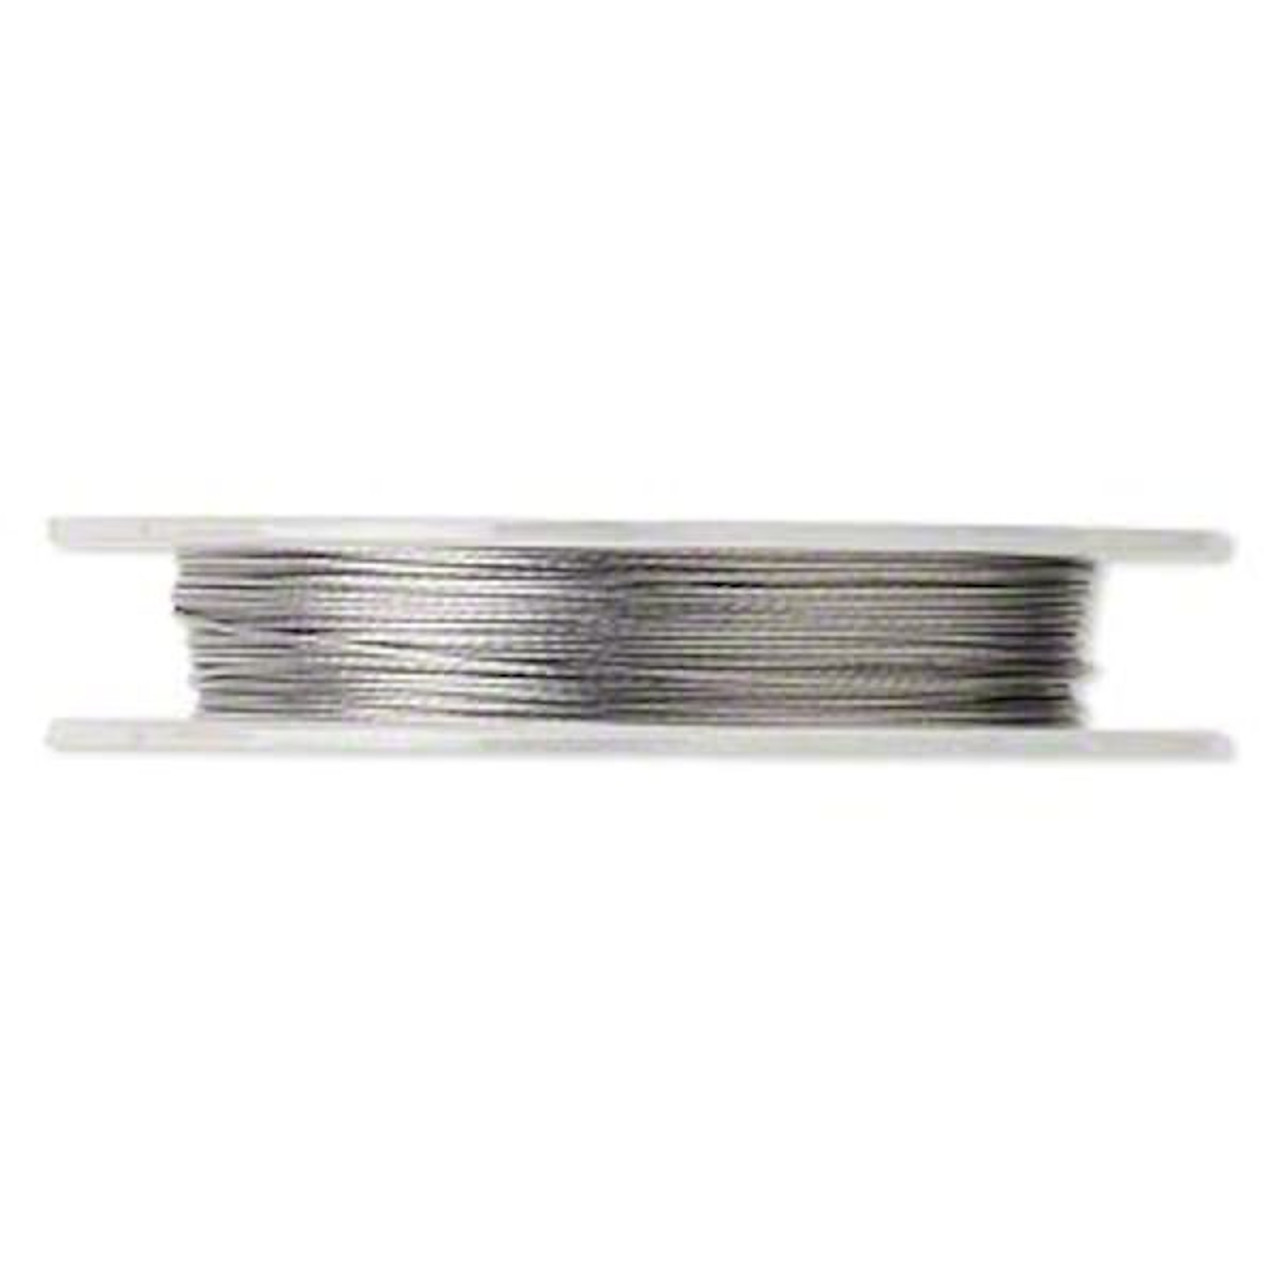 Clear Coat Flex Rite Beading Stringing Wire .012 inch Very Thin 30 Feet Nylon Coated Stainless Steel 7 Strand Tigertail 9.3 lb Break